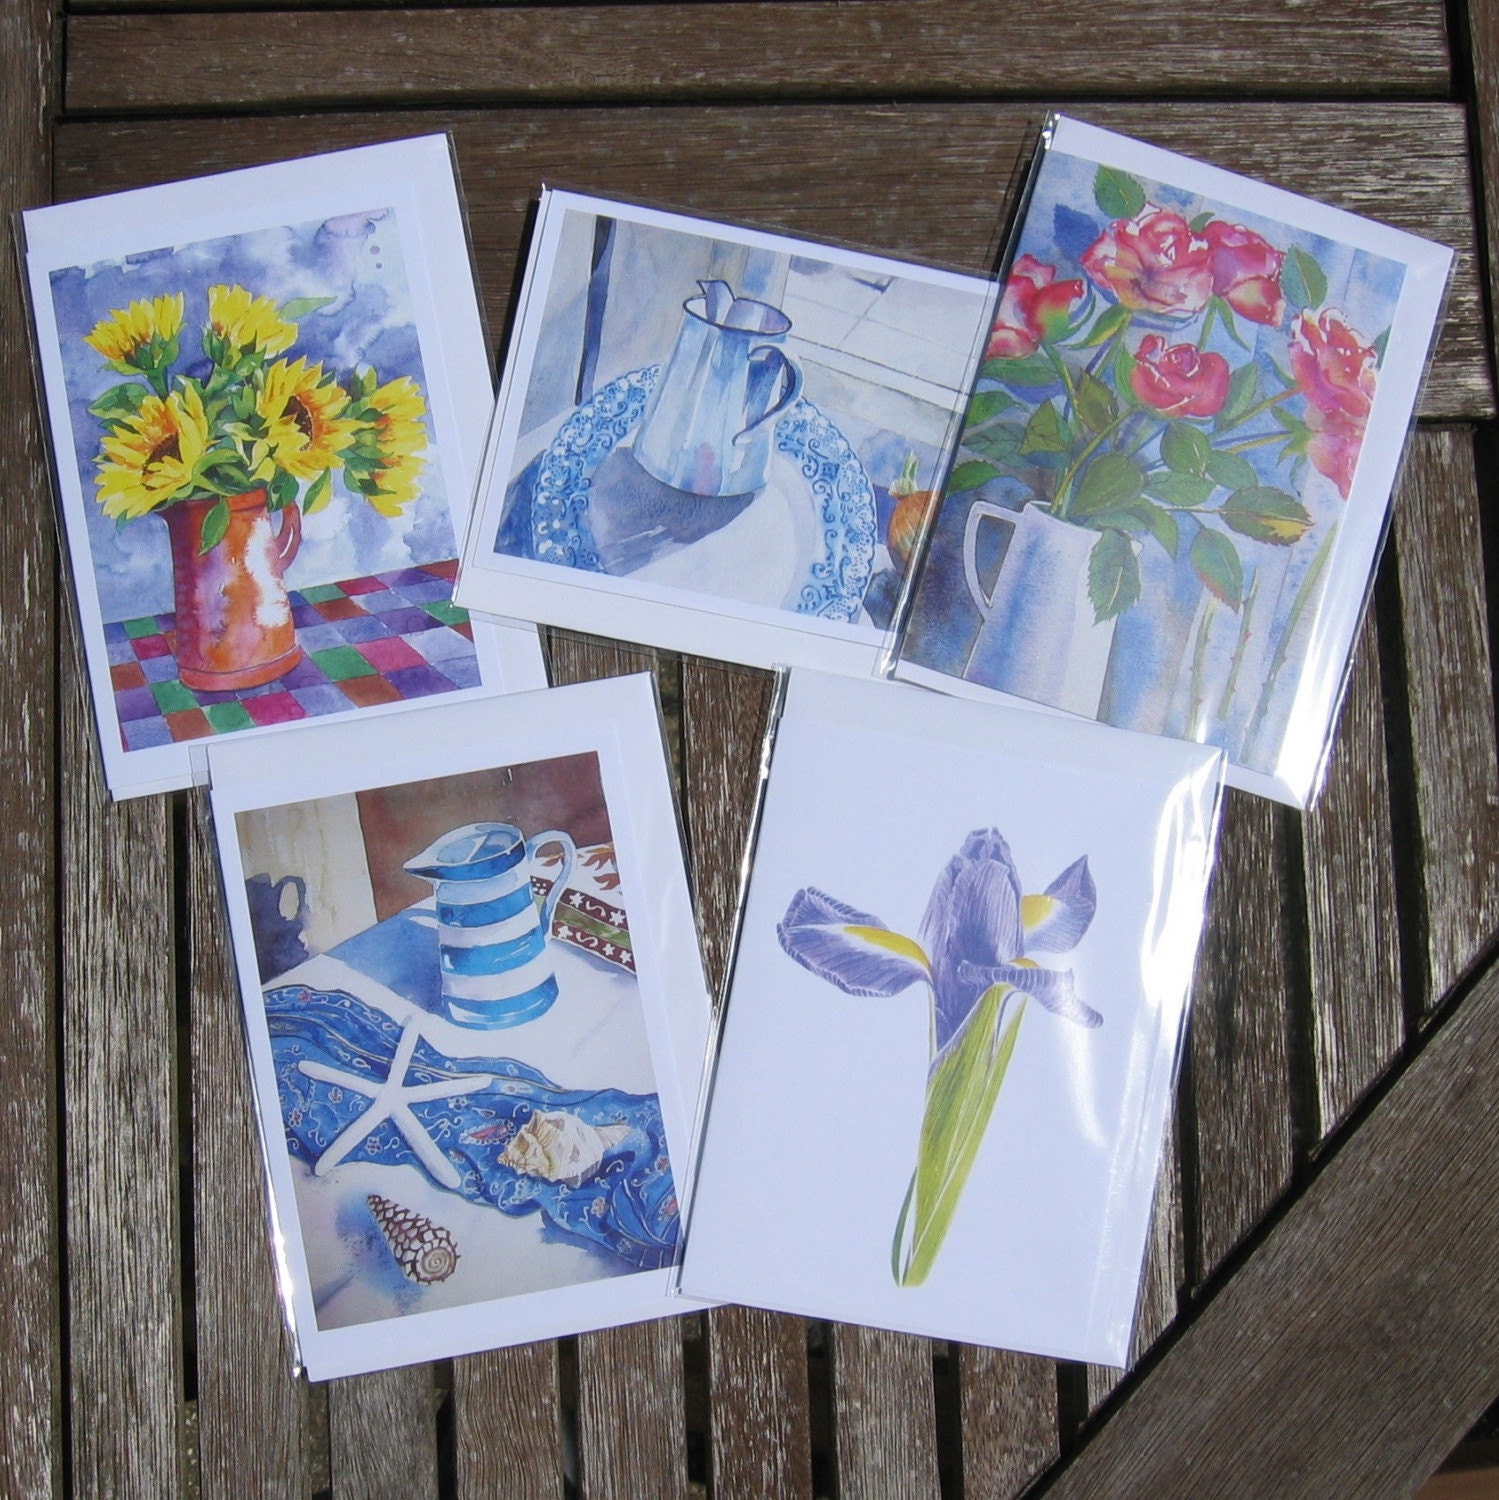 5 Greetings Cards from my Original Watercolours and/or Digital Artwork